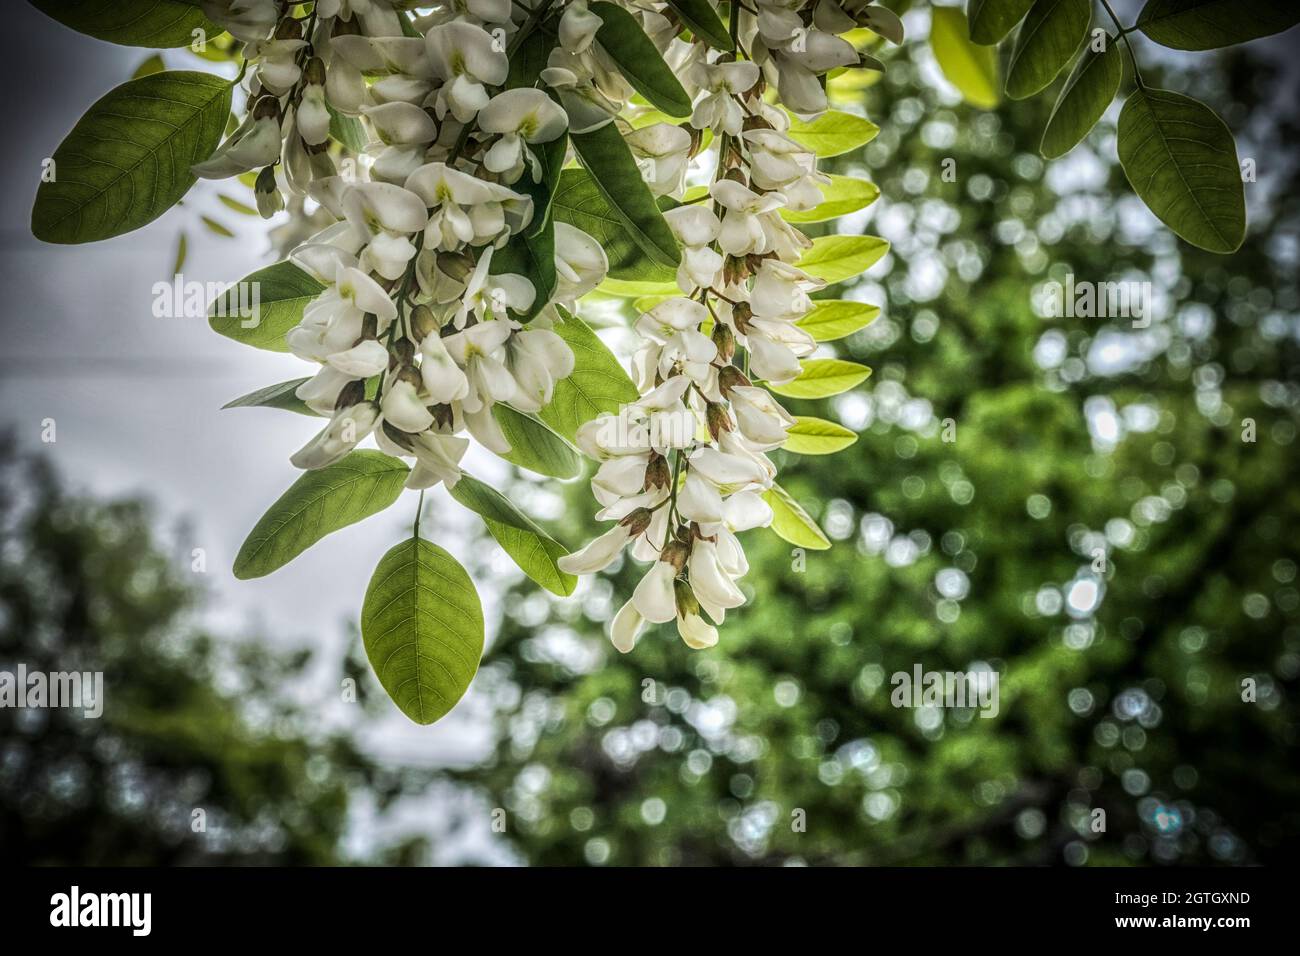 A close-up of white blossom of an acacia tree in spring Stock Photo